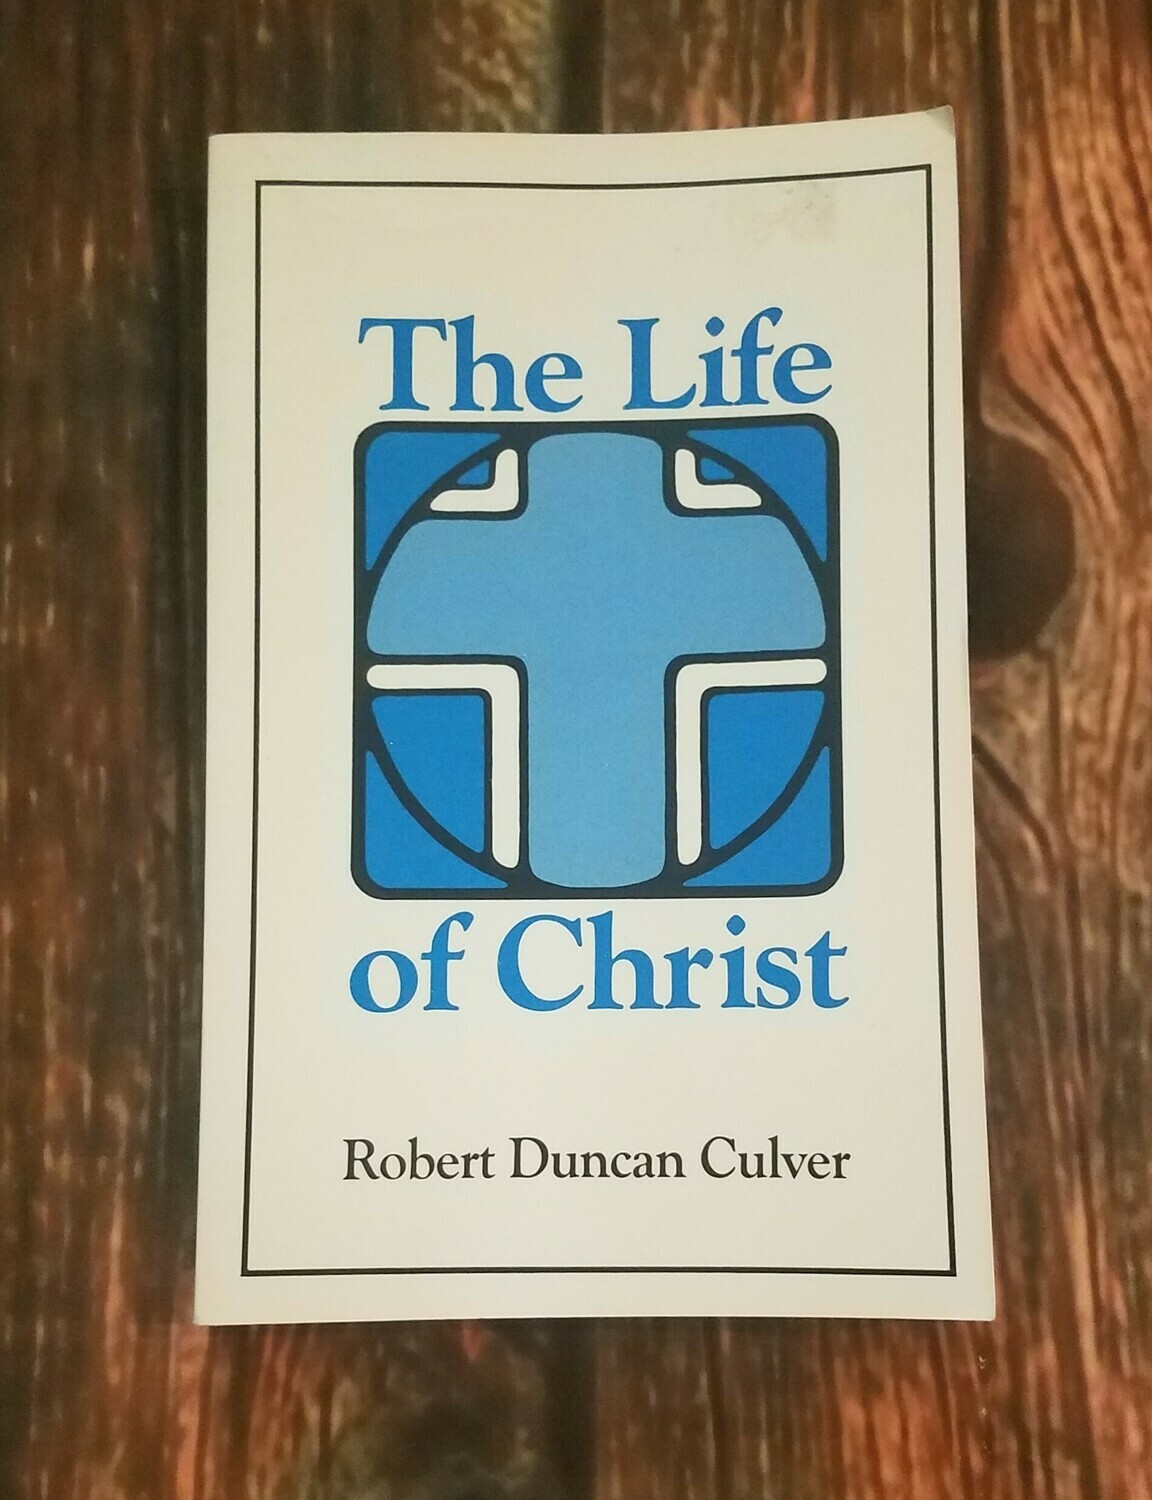 The Life of Christ by Robert Duncan Culver